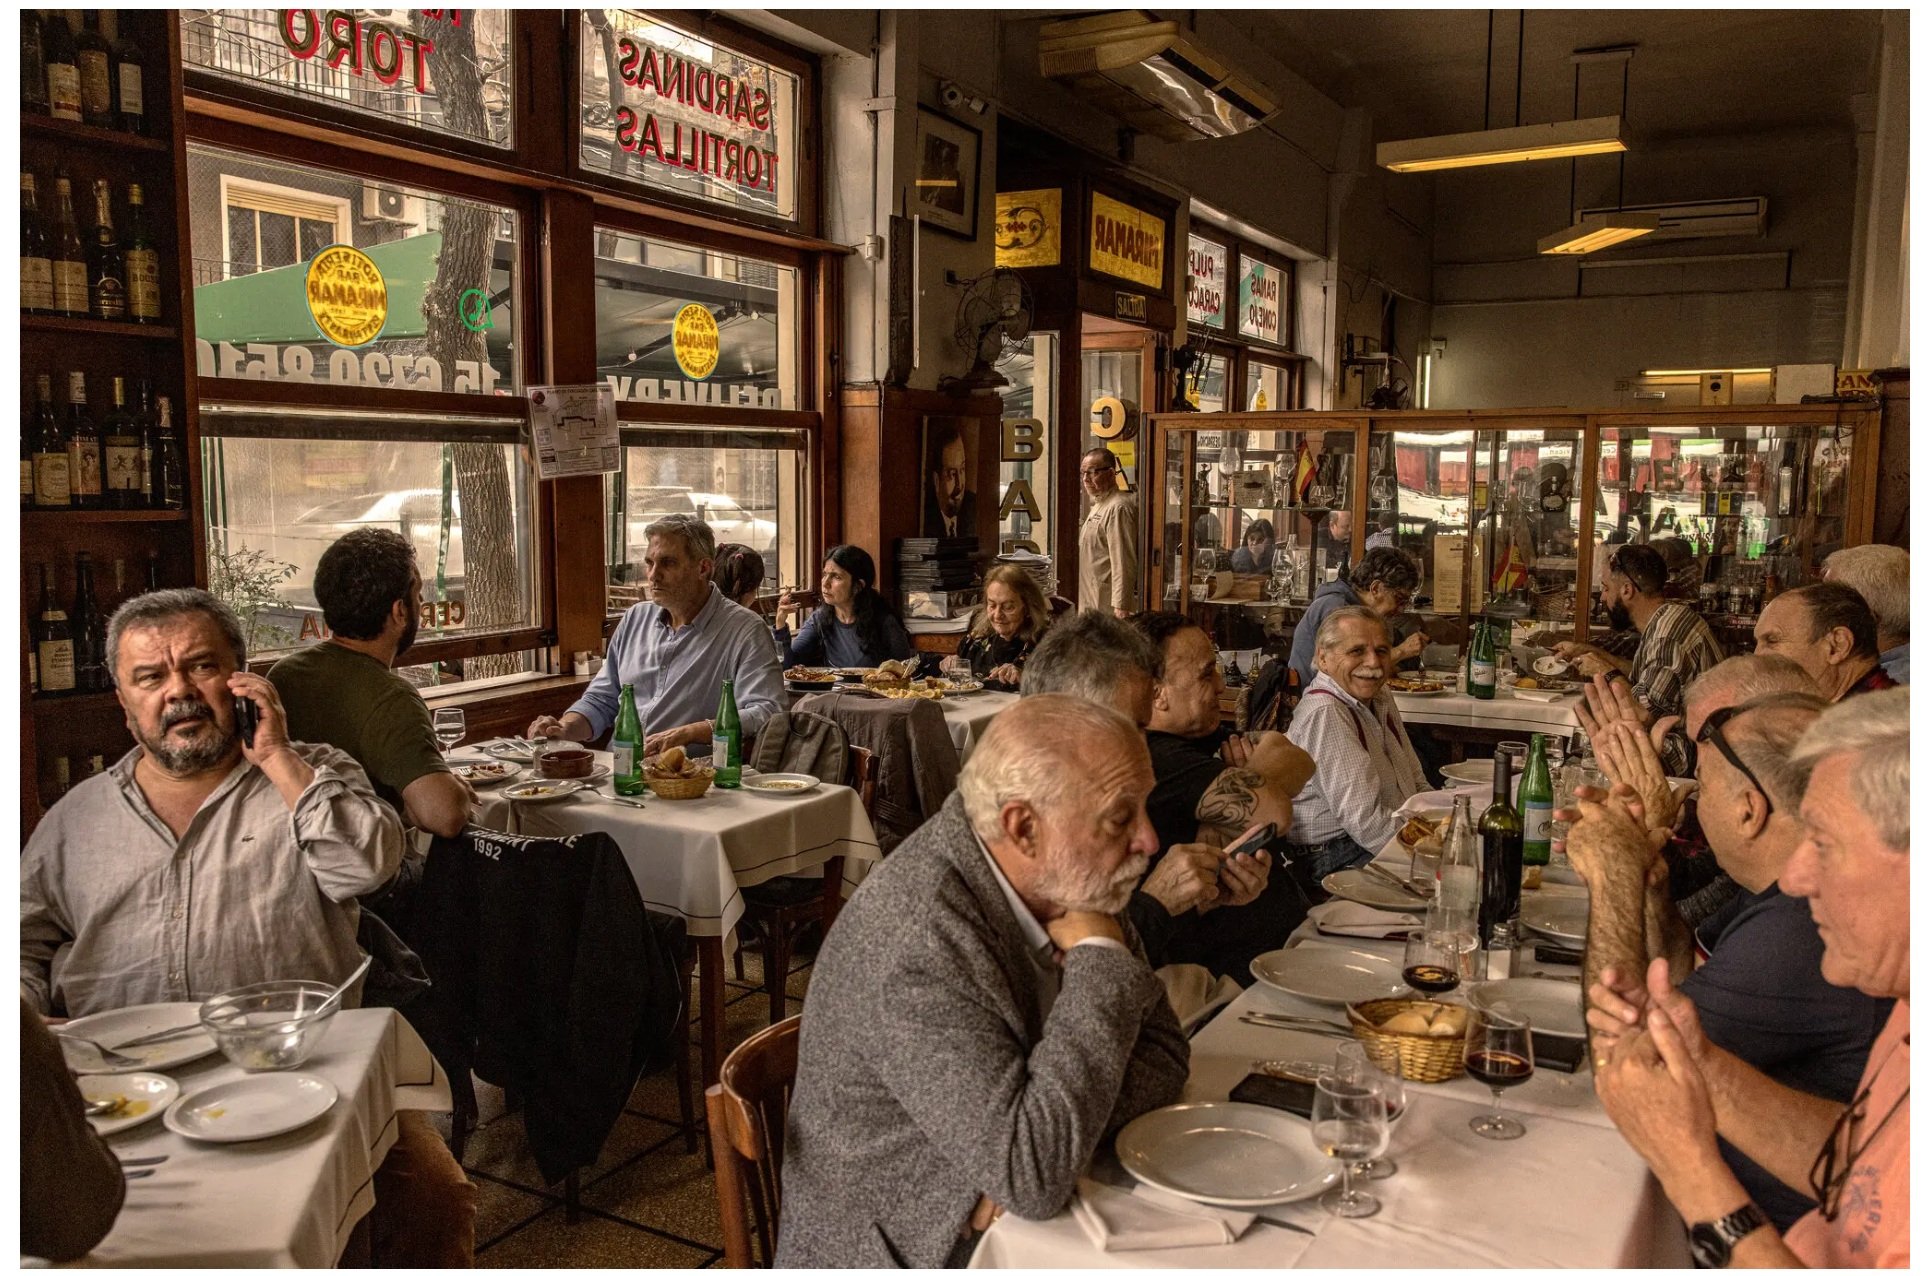 The New York Times - In Argentina, Inflation Passes 100% (and the Restaurants Are Packed) 